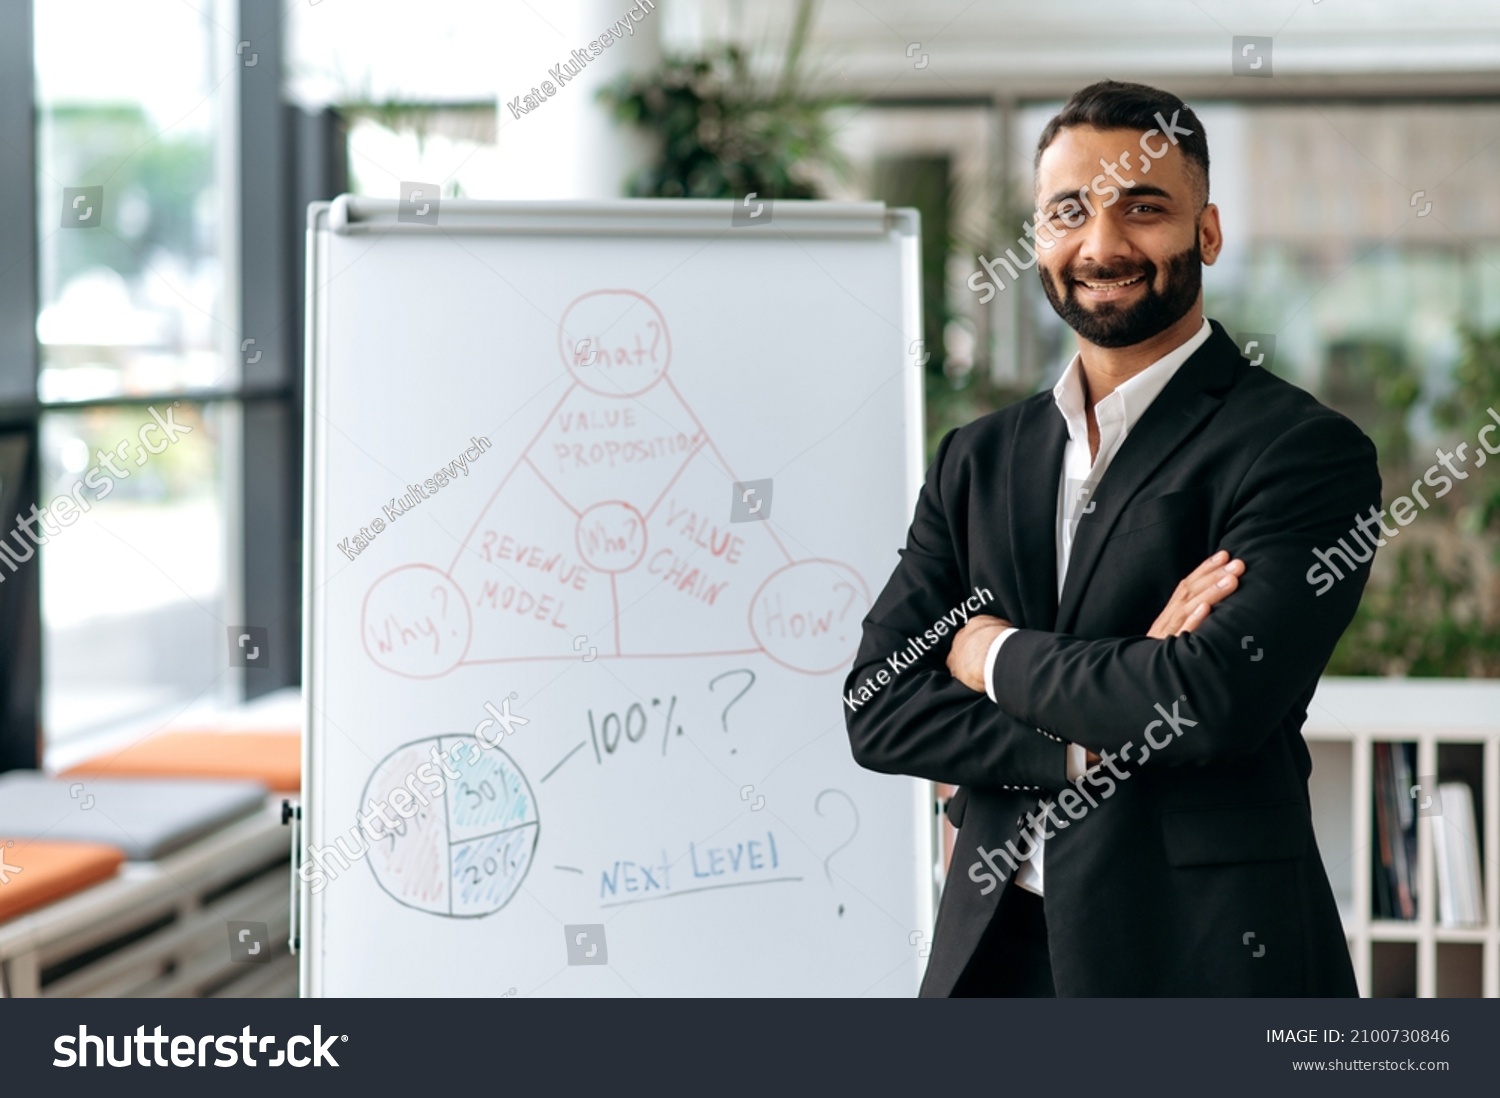 Portrait of successful influential Indian business mentor, in suit, ceo or businessman, stands near whiteboard in office with arms crossed, looks at camera, smile friendly #2100730846